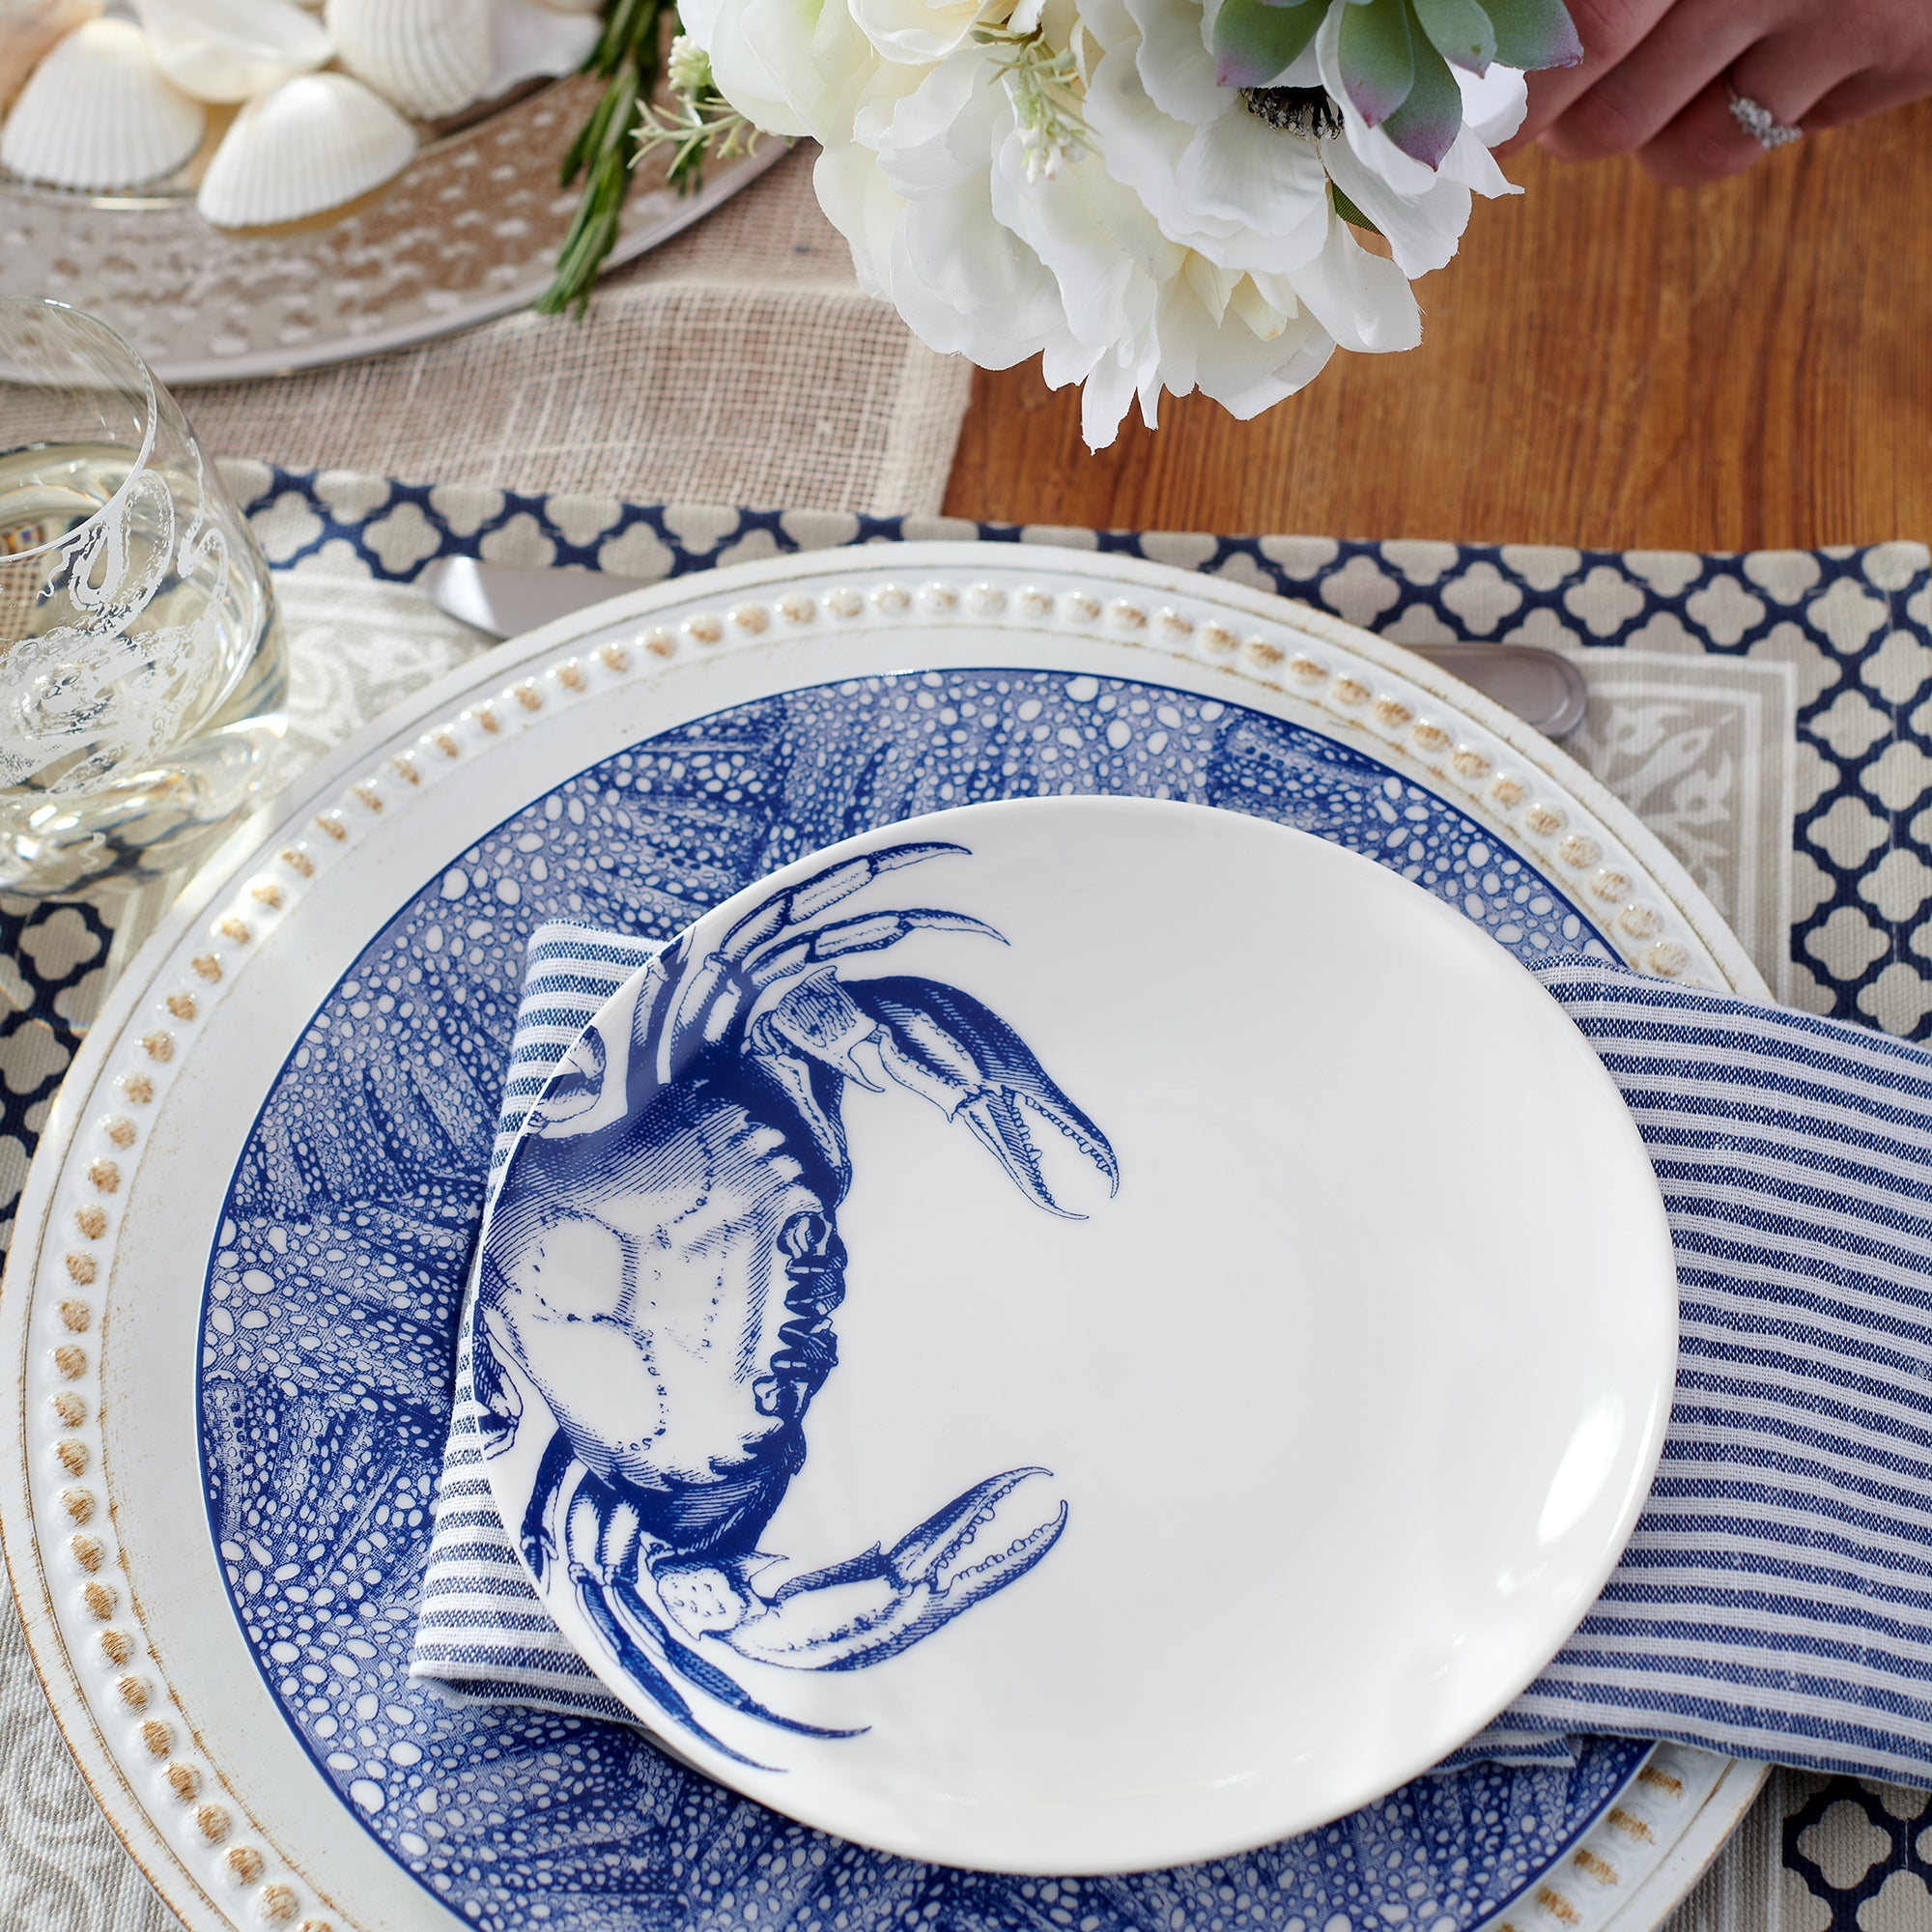 Four heirloom-quality Caskata Artisanal Home Crab Small Plates featuring a charming blue crab pattern on the side are elegantly arranged together.